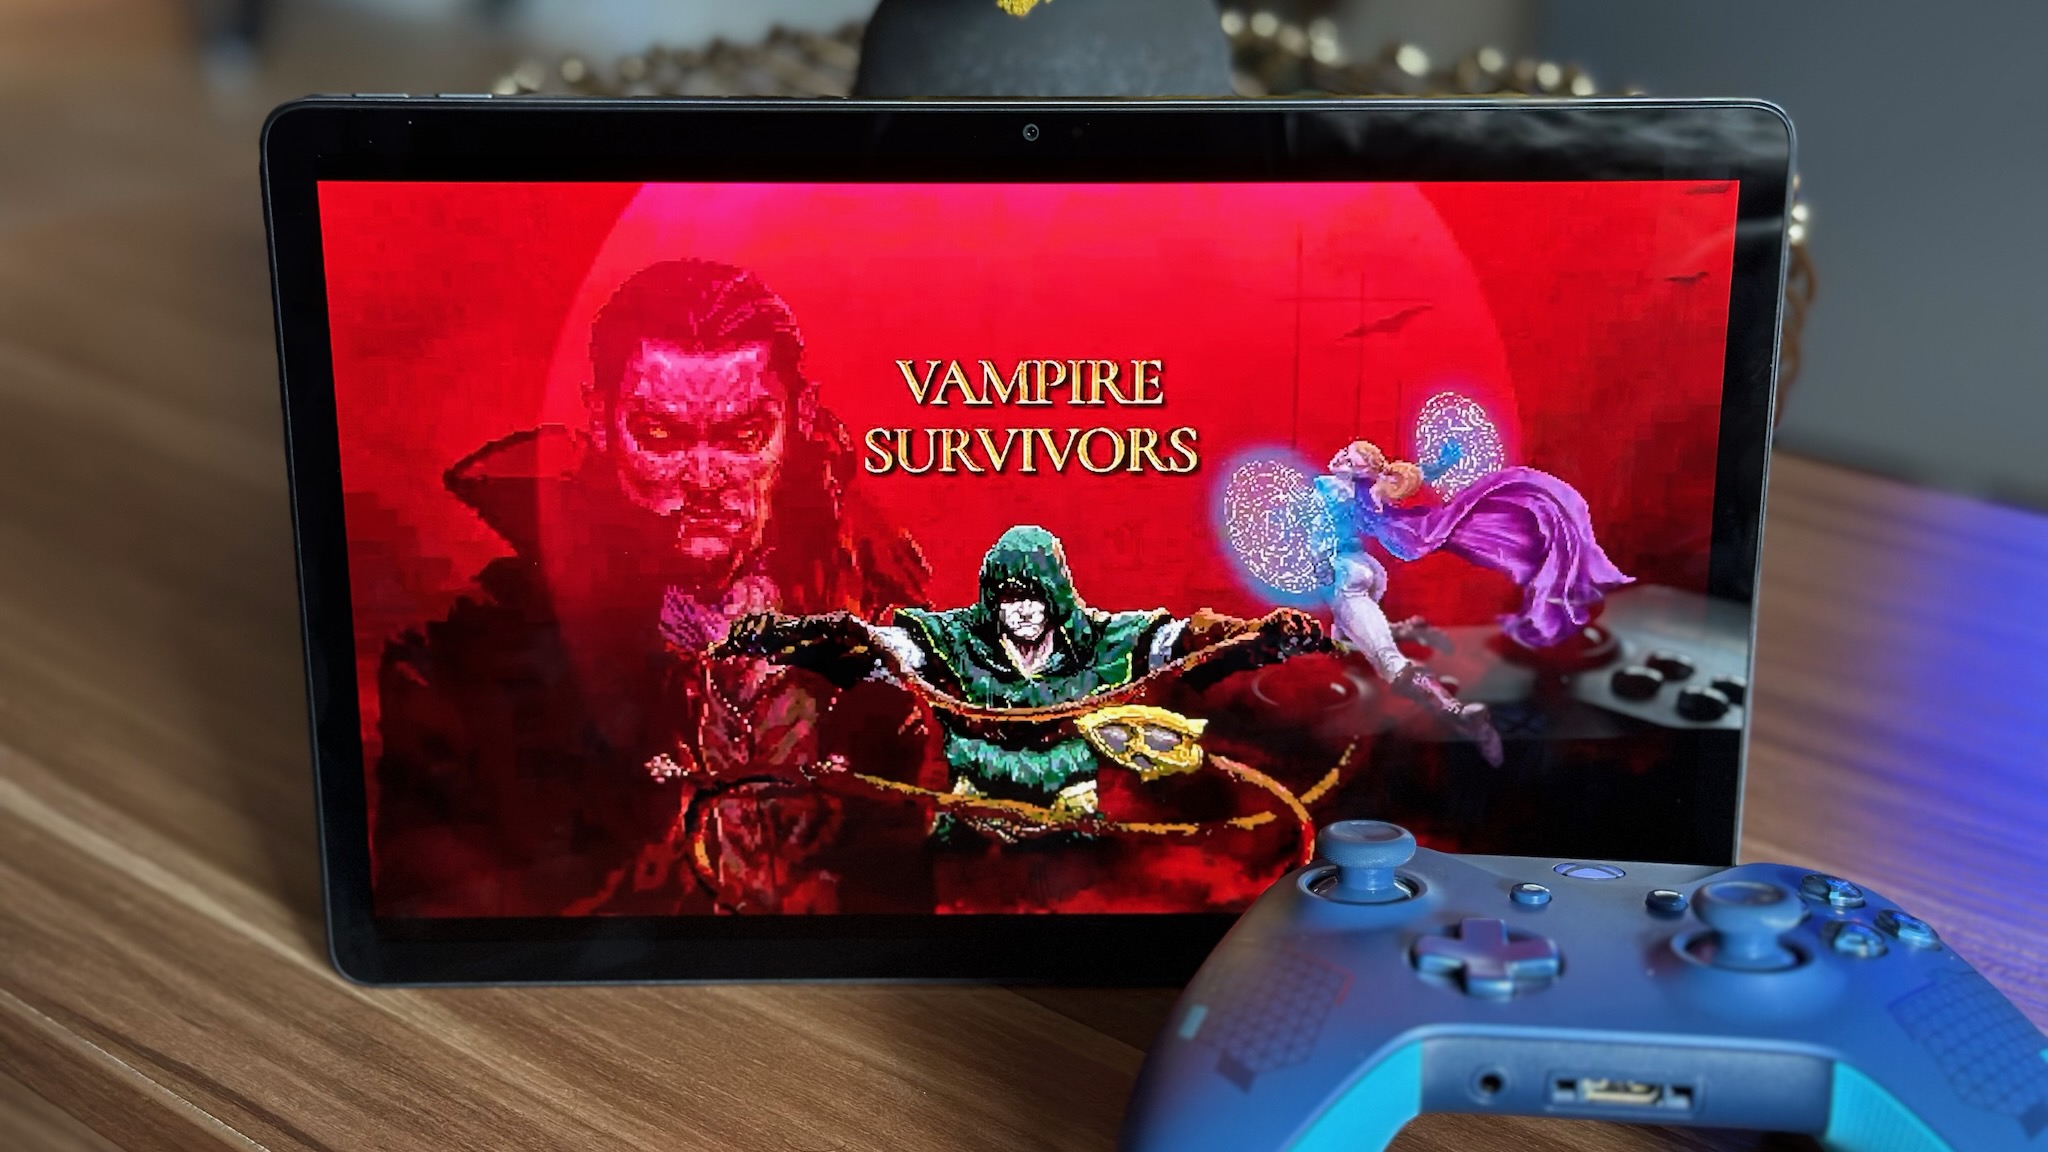 The Vampire Survivors start screen on the Lenovo Tab P11 Pro (2nd Gen), with an Xbox controller in front of the tablet.